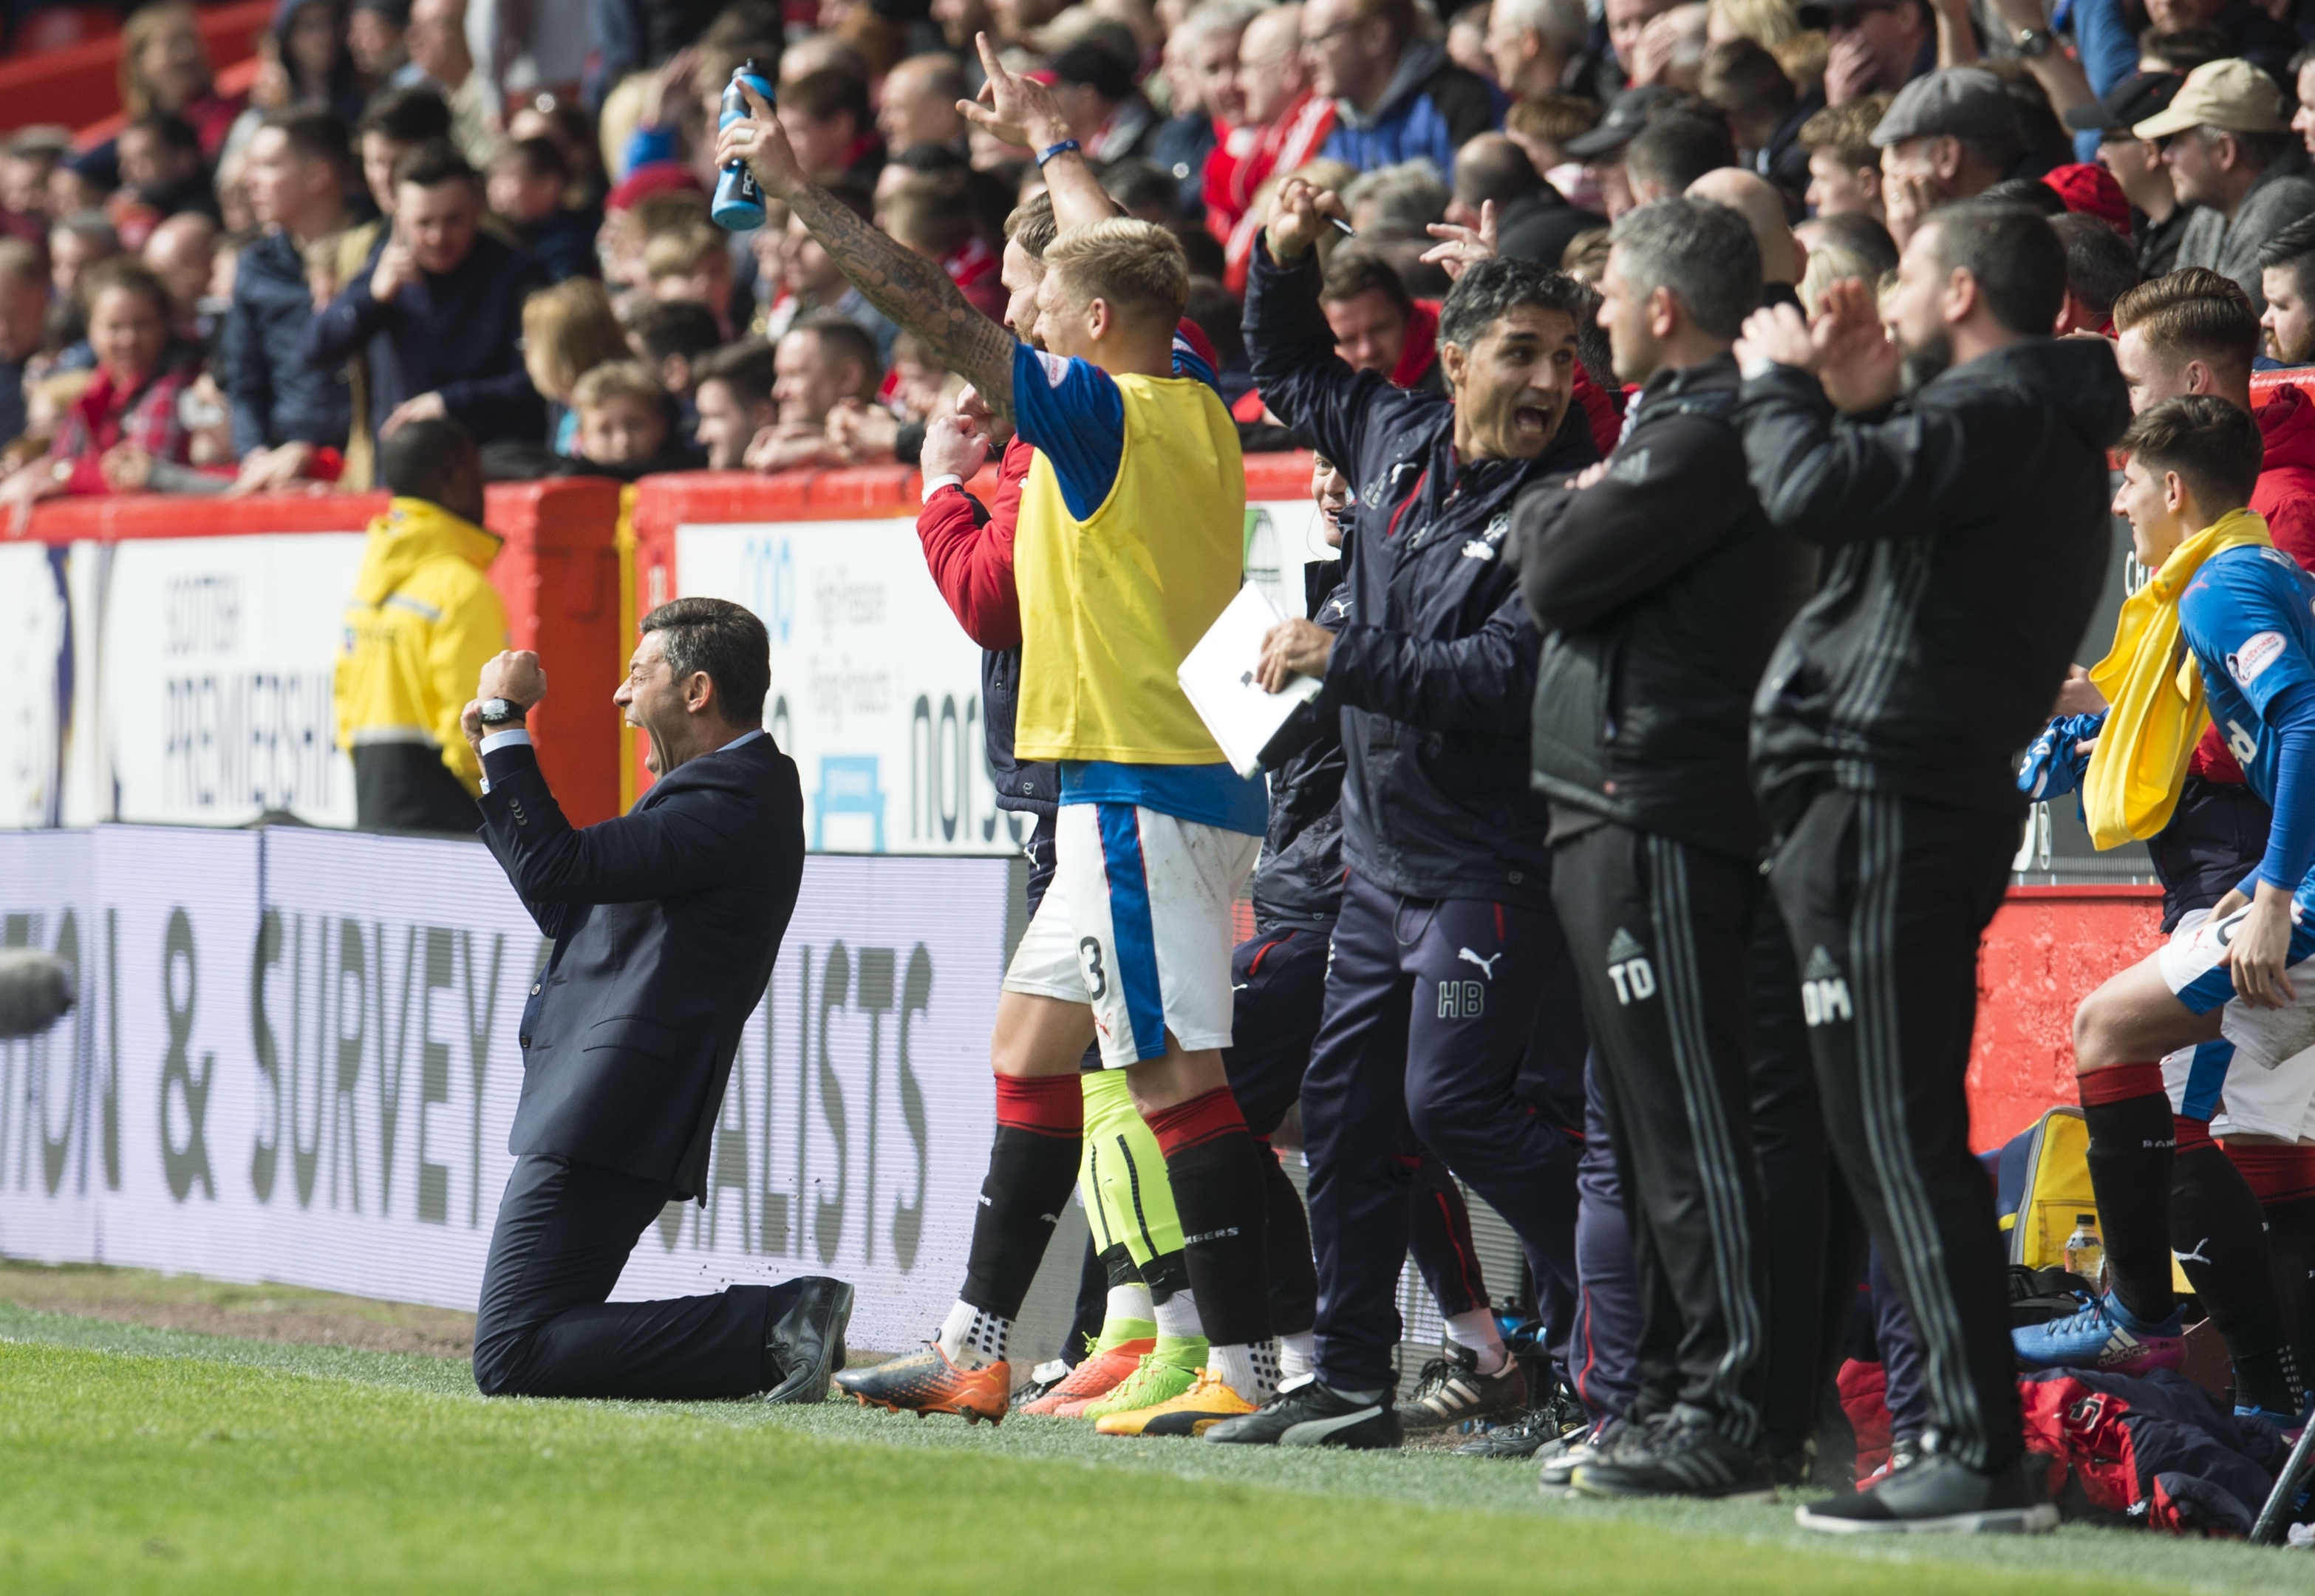 The Rangers bench celebrates as the Dons coaches look on, stunned